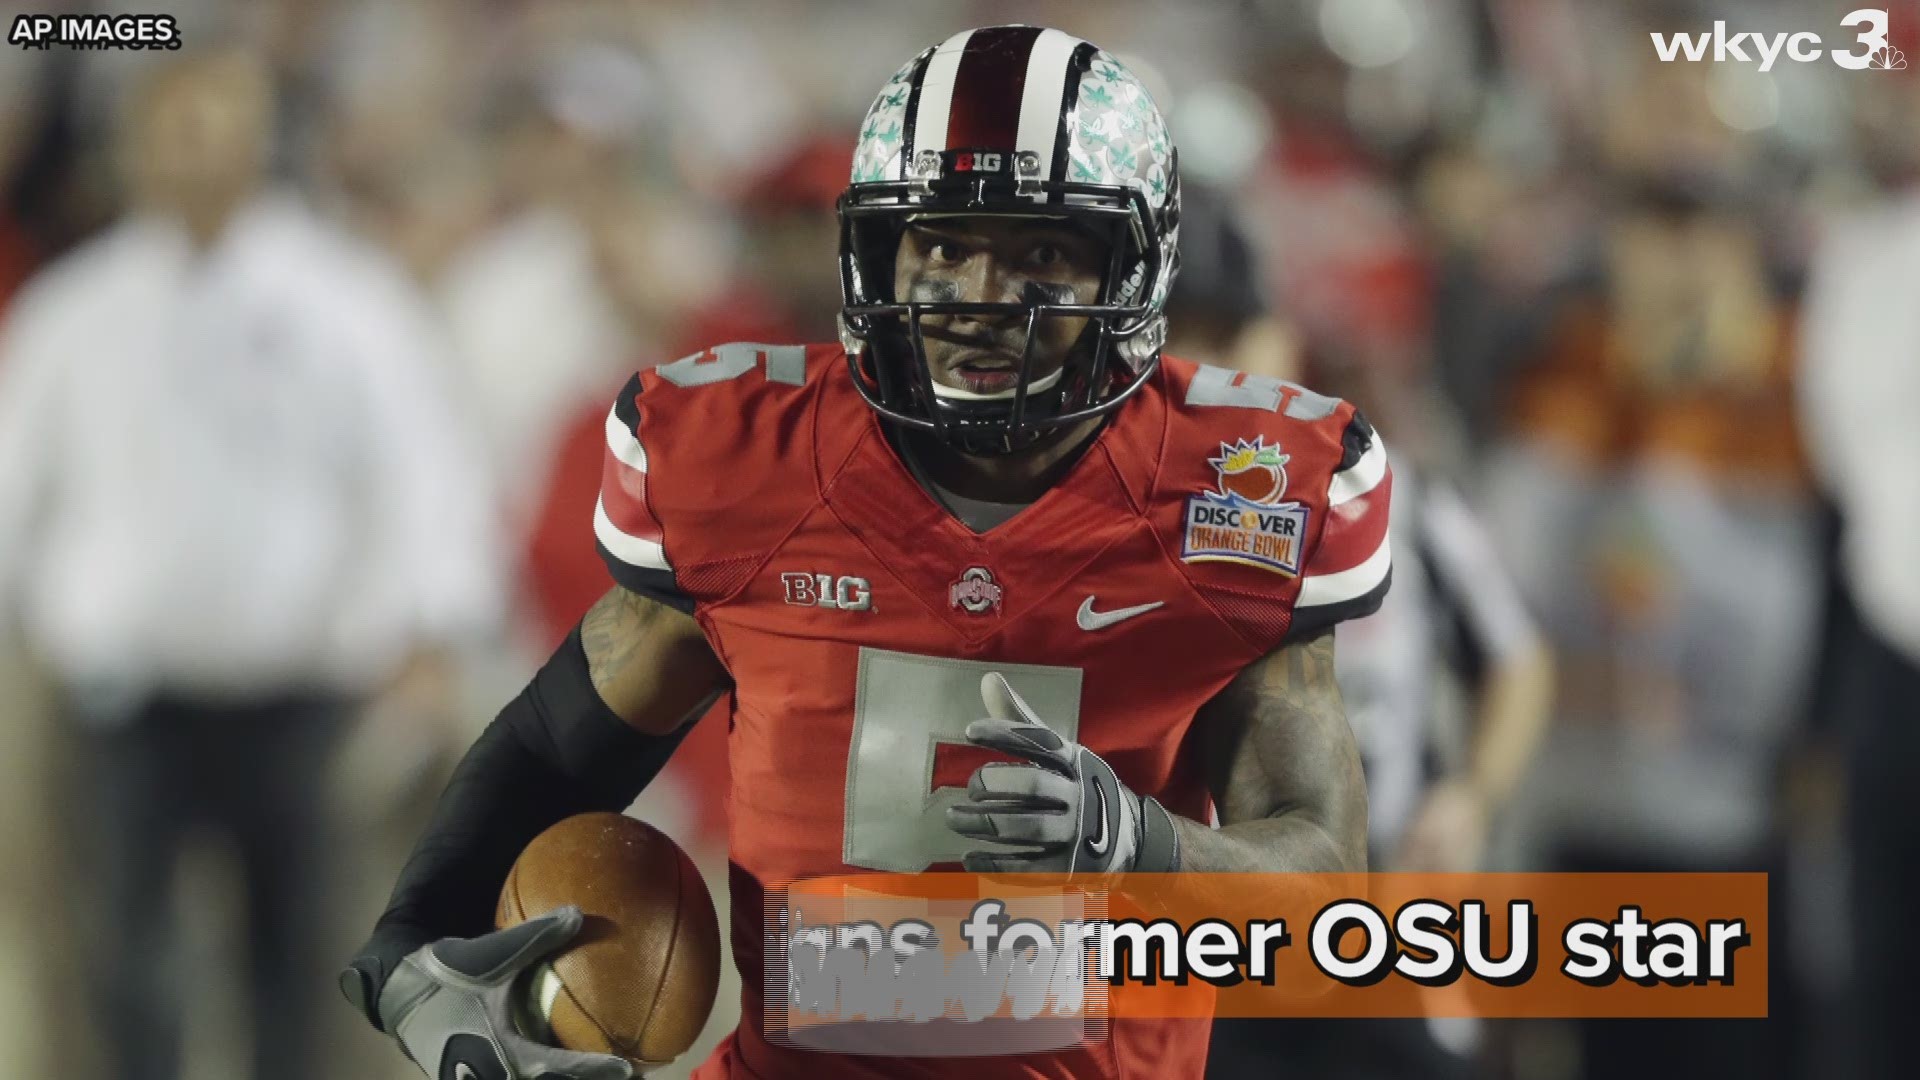 The Cleveland Browns announced on Wednesday that they have signed former Ohio State star and wide receiver Braxton Miller.